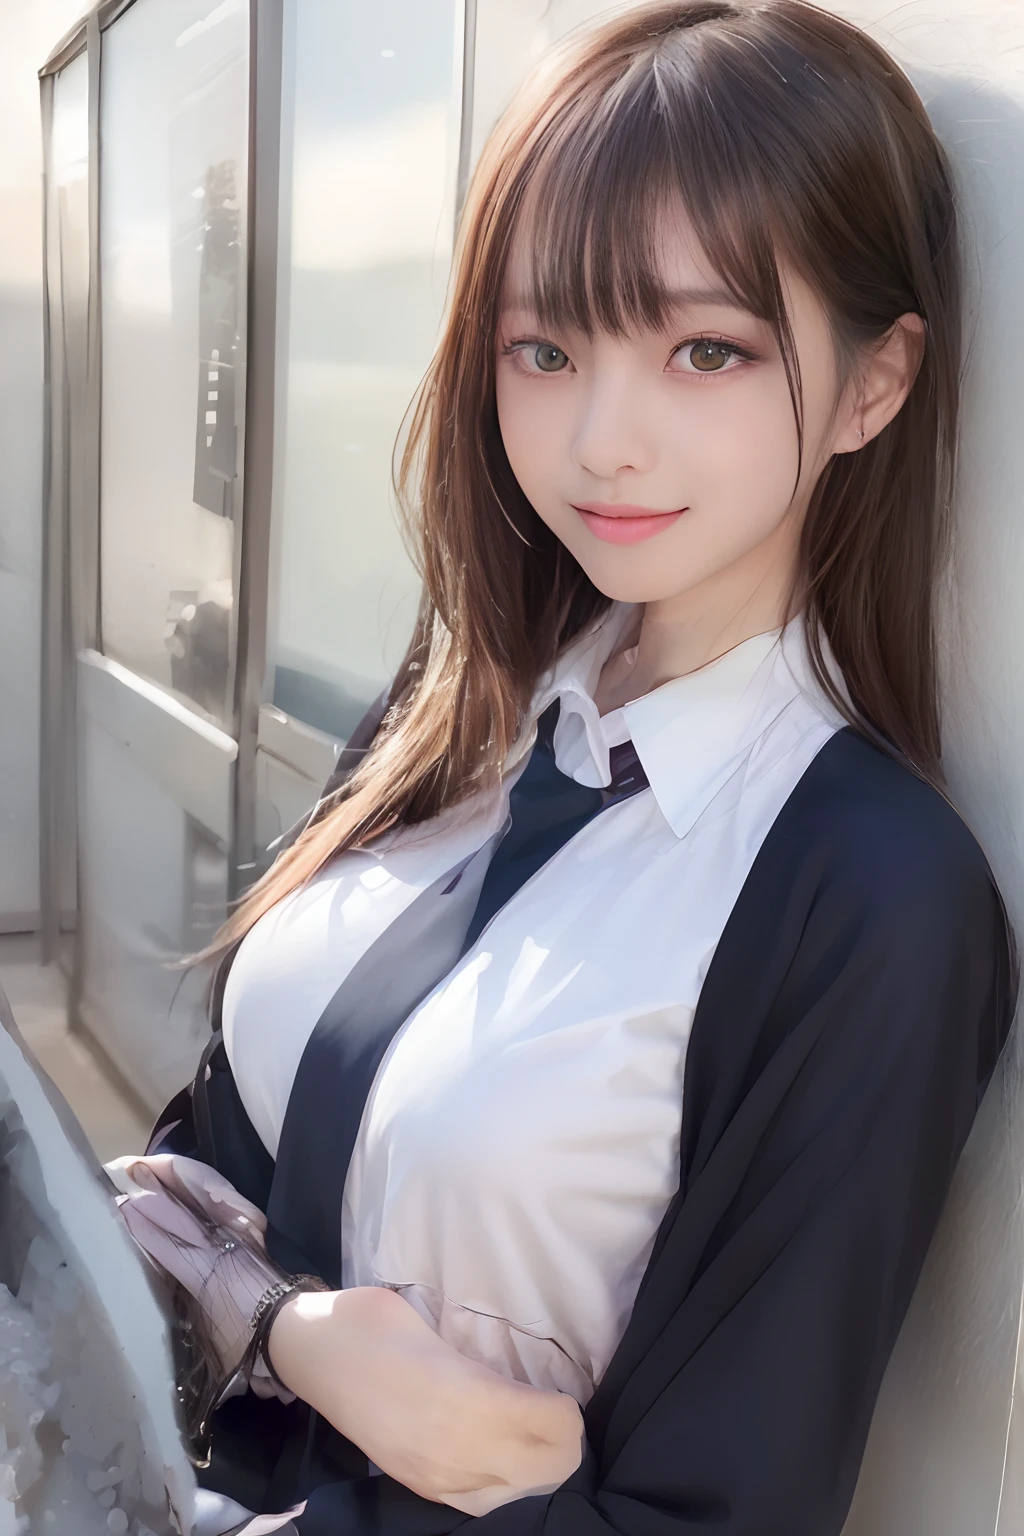 a close up of a woman with long hair wearing a white dress, girl cute-fine-face, white hime cut hairstyle, cute natural anime face, photorealistic anime, real life anime girl, young cute wan asian face, realistic young anime girl, cute - fine - face, Hyper realistic anime, Young adorable Korean face, kawaii realistic portrait, Gwise close-up portrait of slim woman about 15 years old, Slim body, beautiful upper body, Japanese Models, Perfect body, Slim body, photo of slim girl model, Beautiful body, jaw-dropping beauty, Photo of slim girl, waist - shot、girl portrait, realistic anime 3 d style, kawaii realistic portrait,